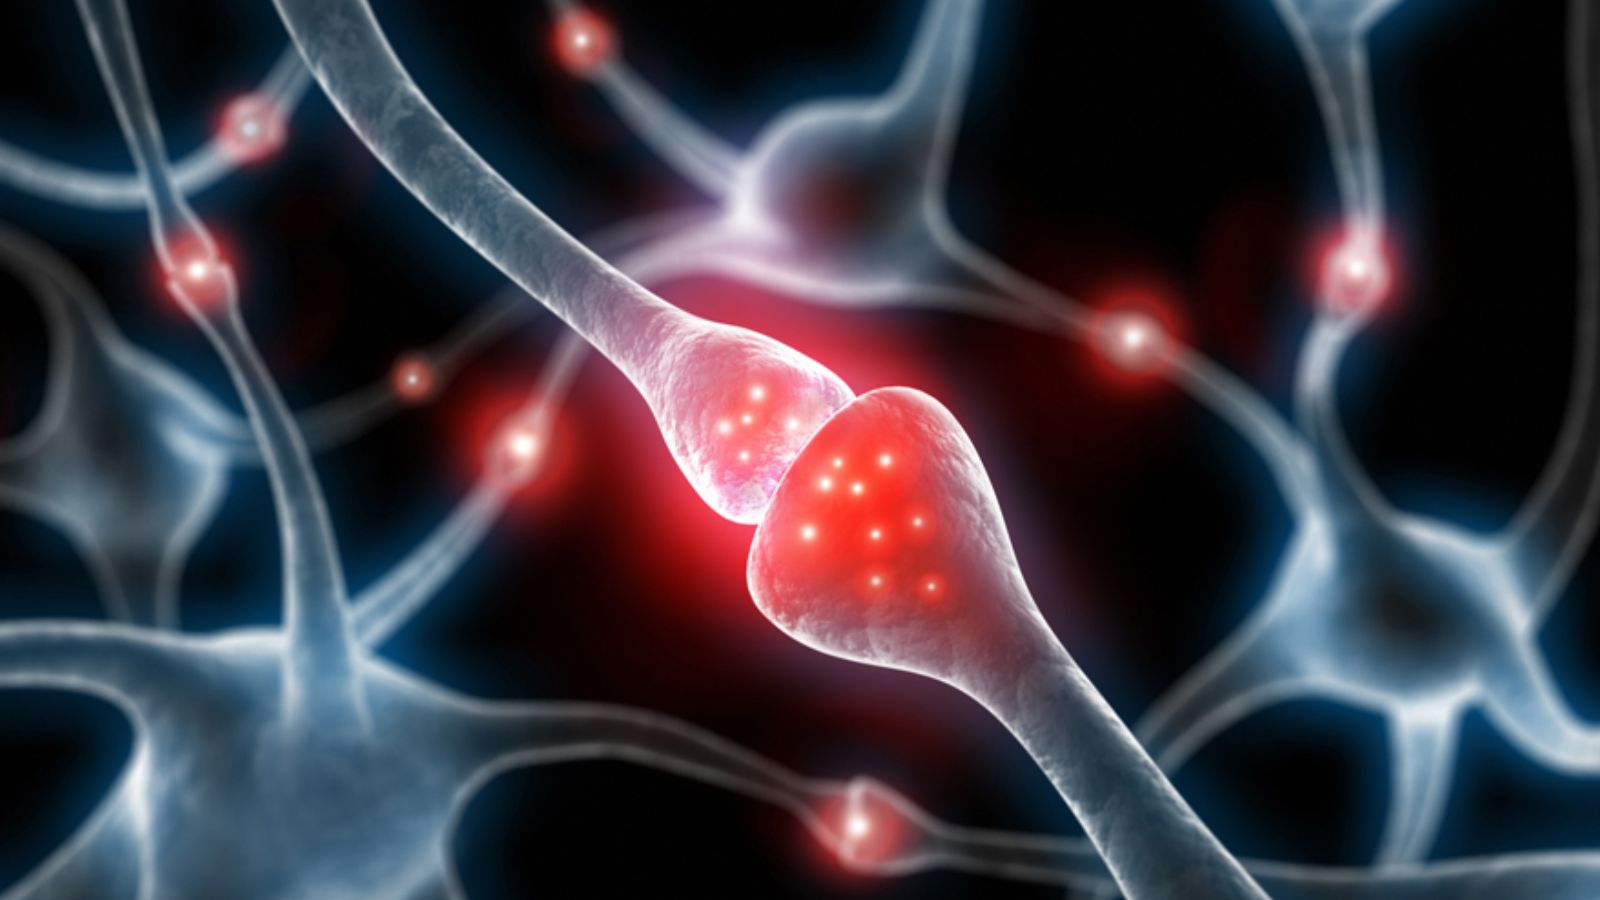 Nerve signalling helps the brain and muscles communicate to control movement